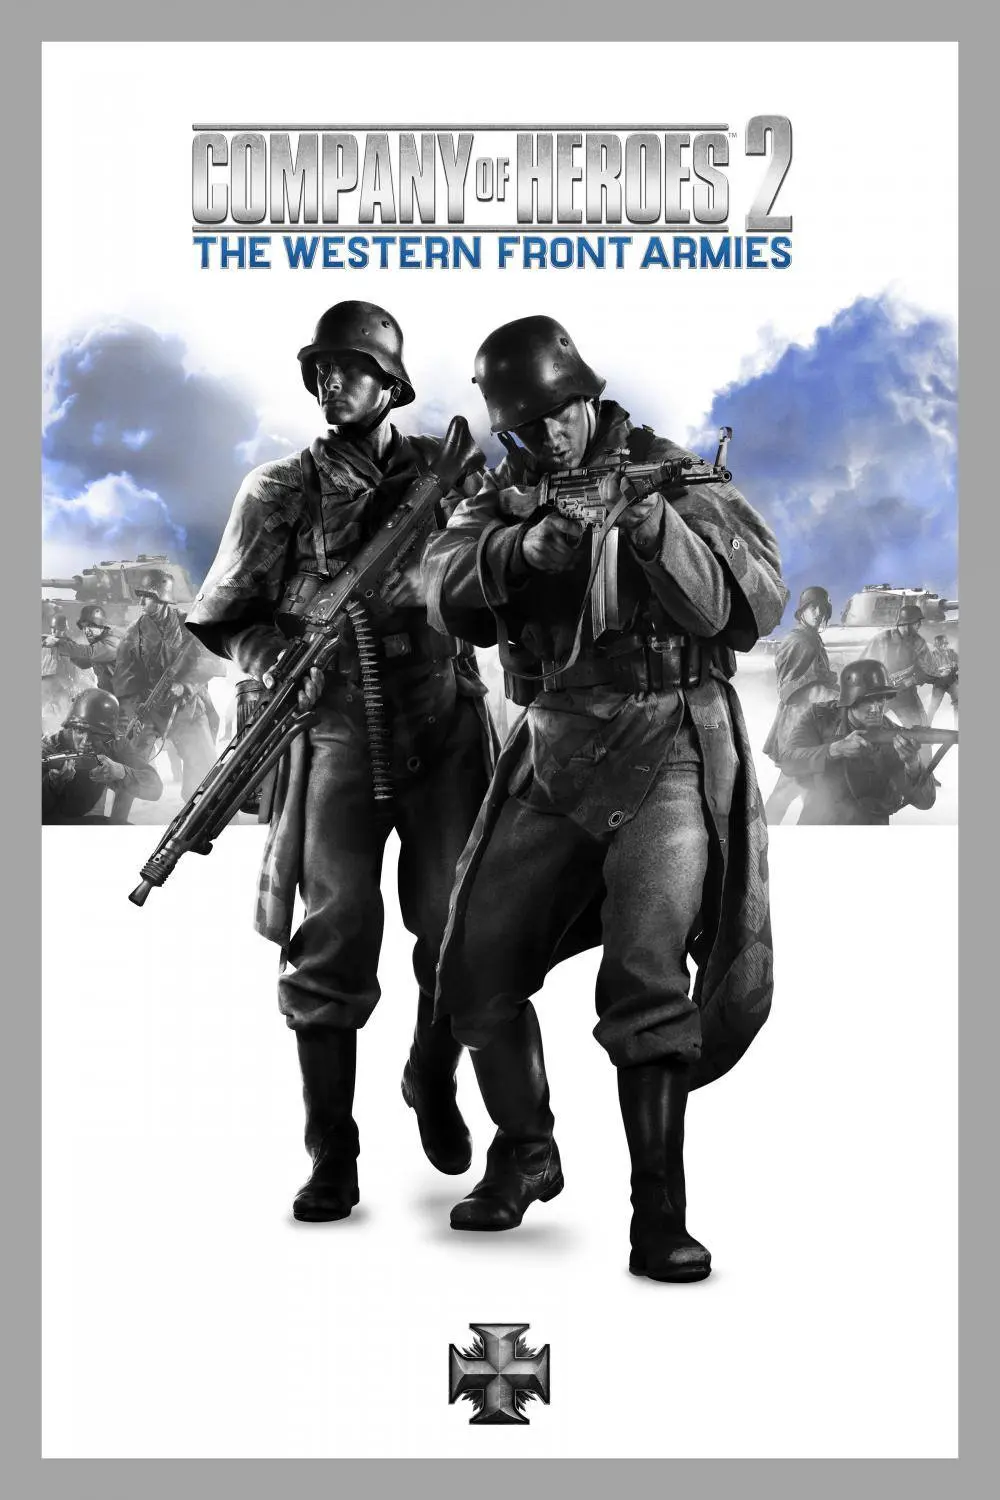 Company of Heroes 2 - The Western Front Armies (EU) (PC / Mac / Linux) - Steam - Digital Codes